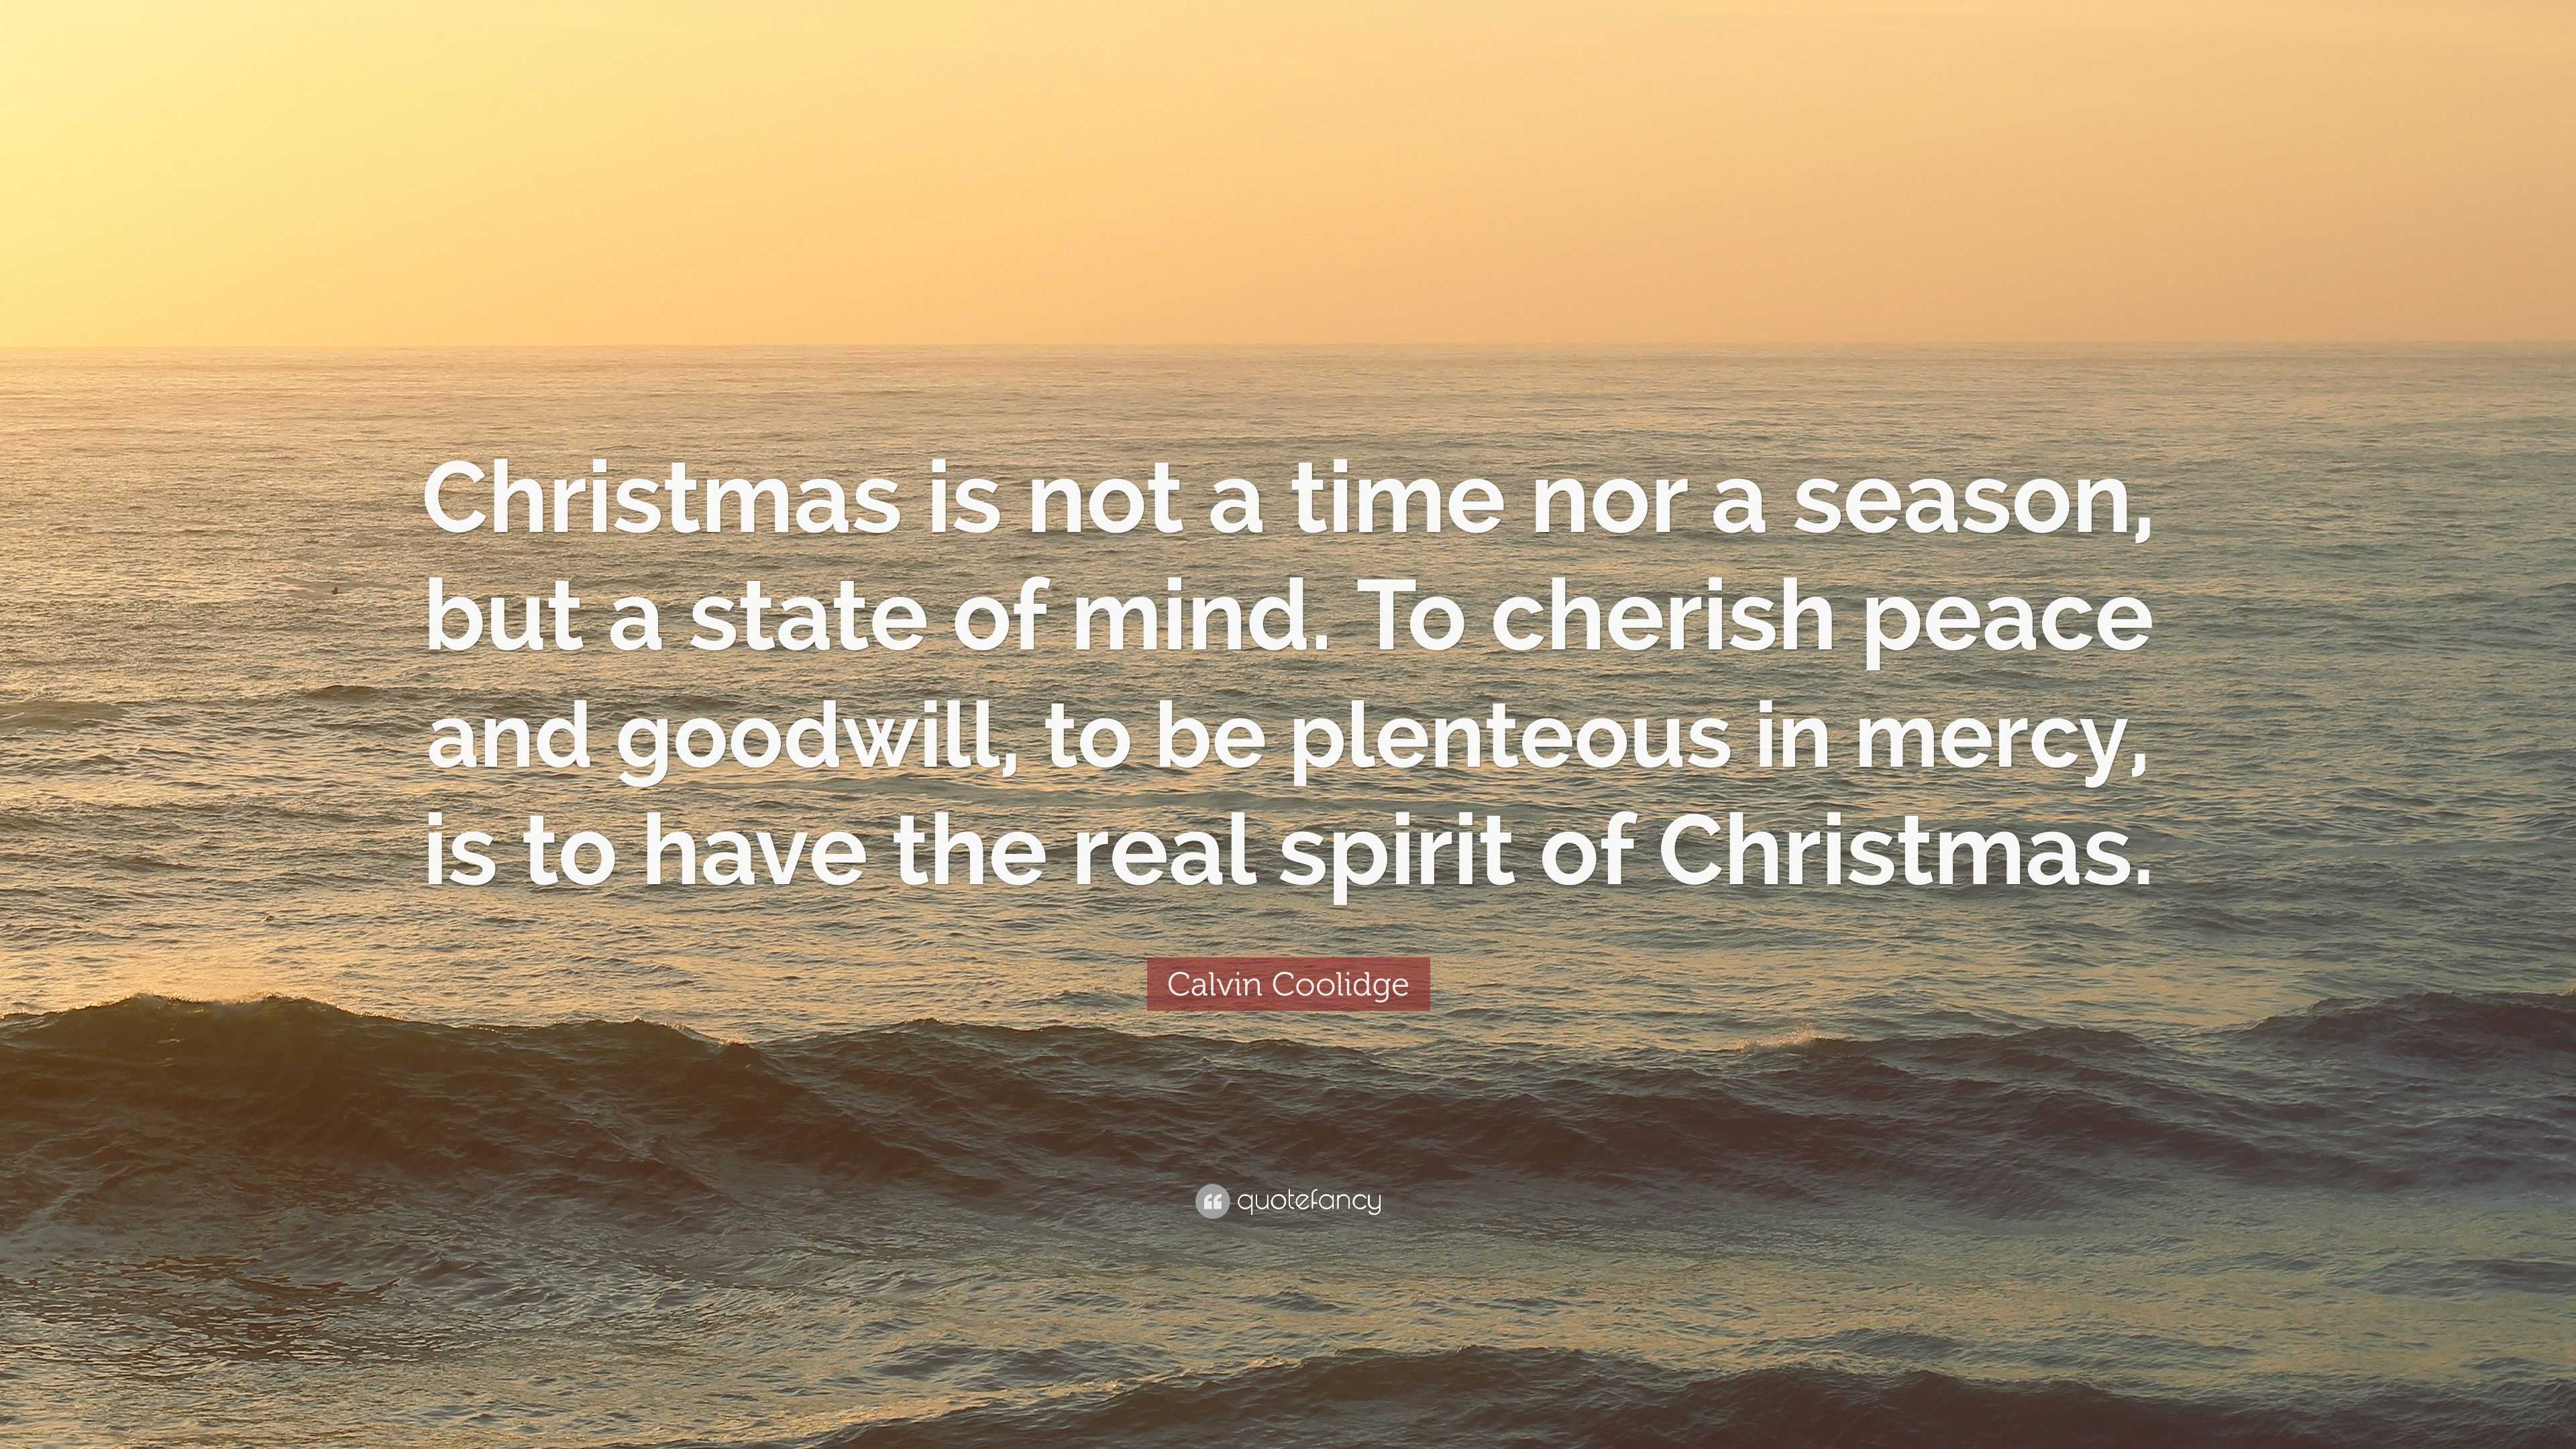 2020501 Calvin Coolidge Quote Christmas is not a time nor a season but a